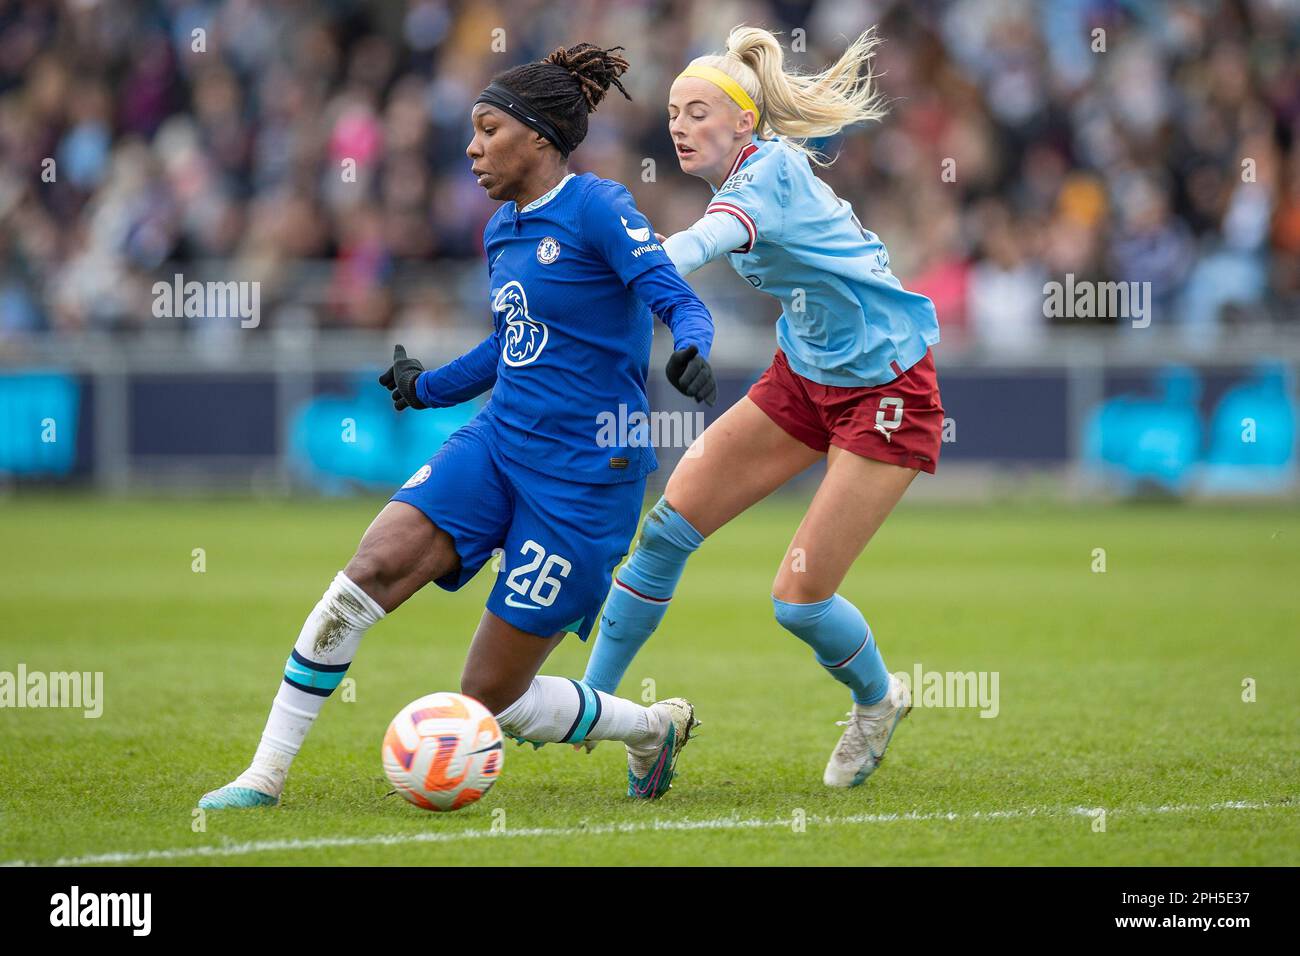 Manchester on Sunday 26th March 2023. Kadeisha Buchanan #26 (GK)of Chelsea  F.C] tackled by Alex Greenwood #5 of Manchester City during the Barclays FA  Women's Super League match between Manchester City and